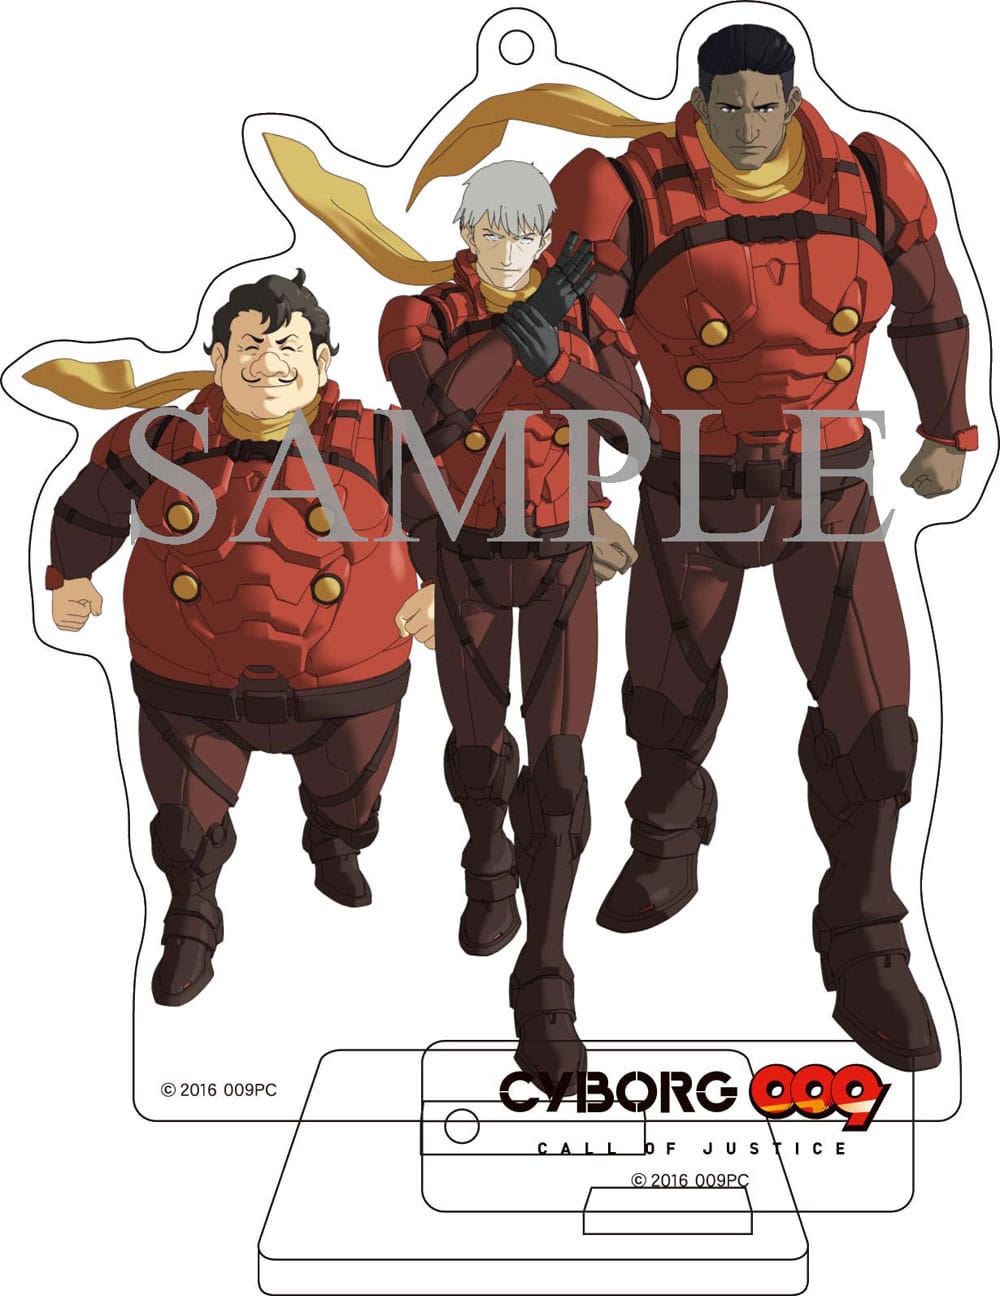 yTOHO animation STORE ŁzCYBORG009 CALL OF JUSTICE Vol.3 DVD 񐶎Y+IWiANX^fBZbg